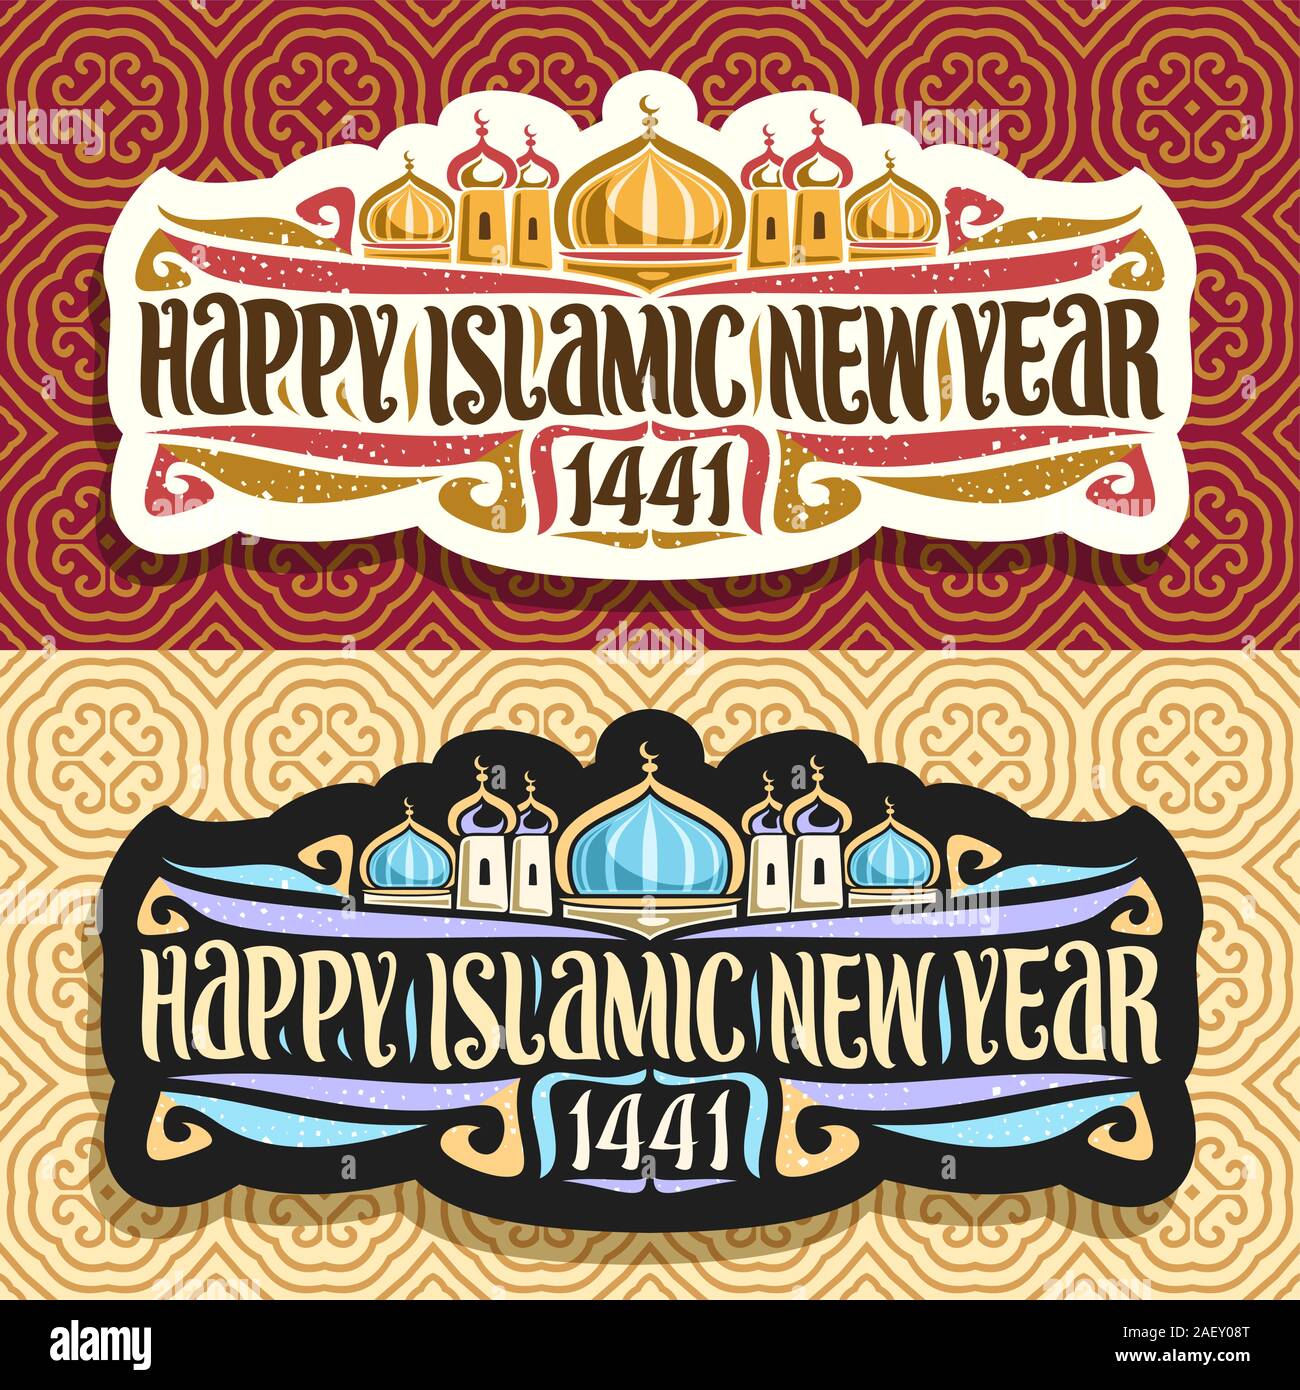 Vector logos for Islamic New Year, 2 stickers with muslim mosque on day and night background, original brush type for words happy islamic new year 144 Stock Vector